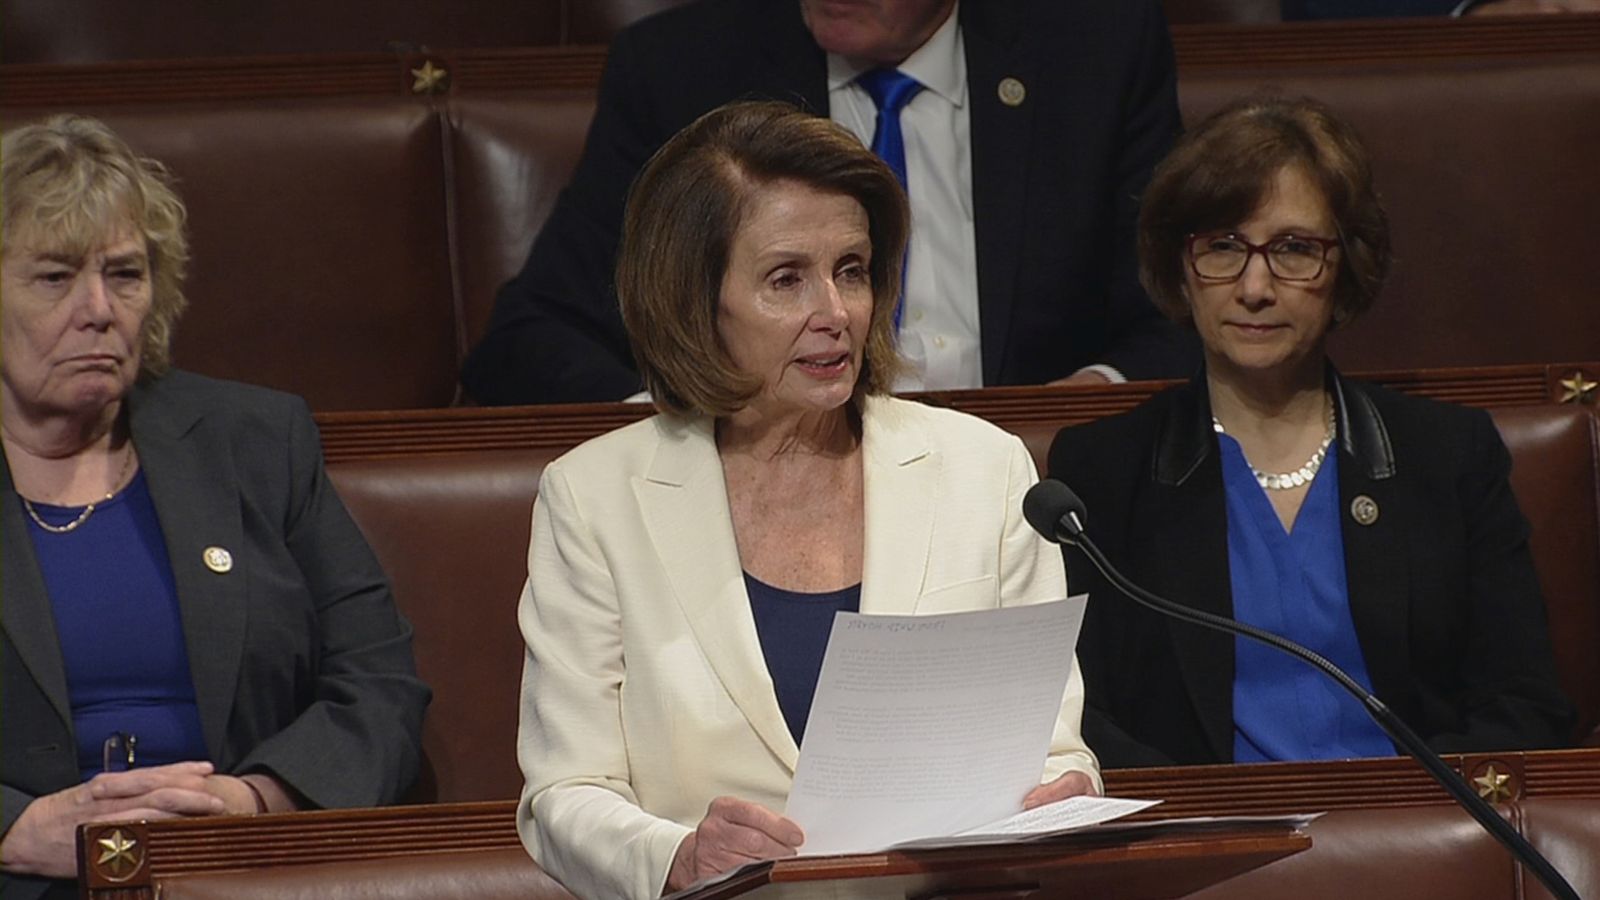 US politician Nancy Pelosi delivers record eight-hour 'filibuster' on immigration